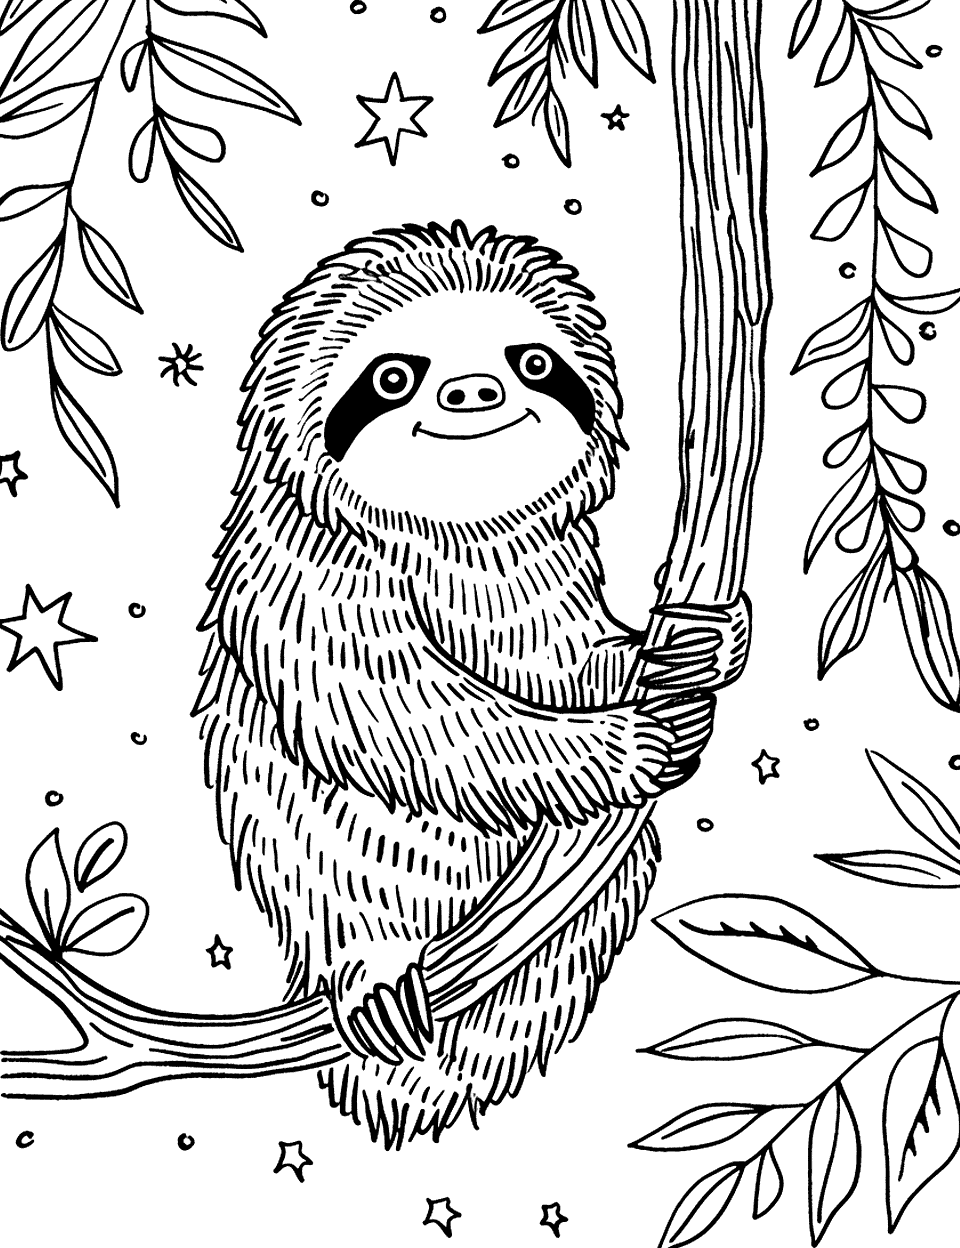 Star Gazing Sloth at Night Coloring Page - A sloth looking up at a starry night sky, positioned on a branch that gently sways.